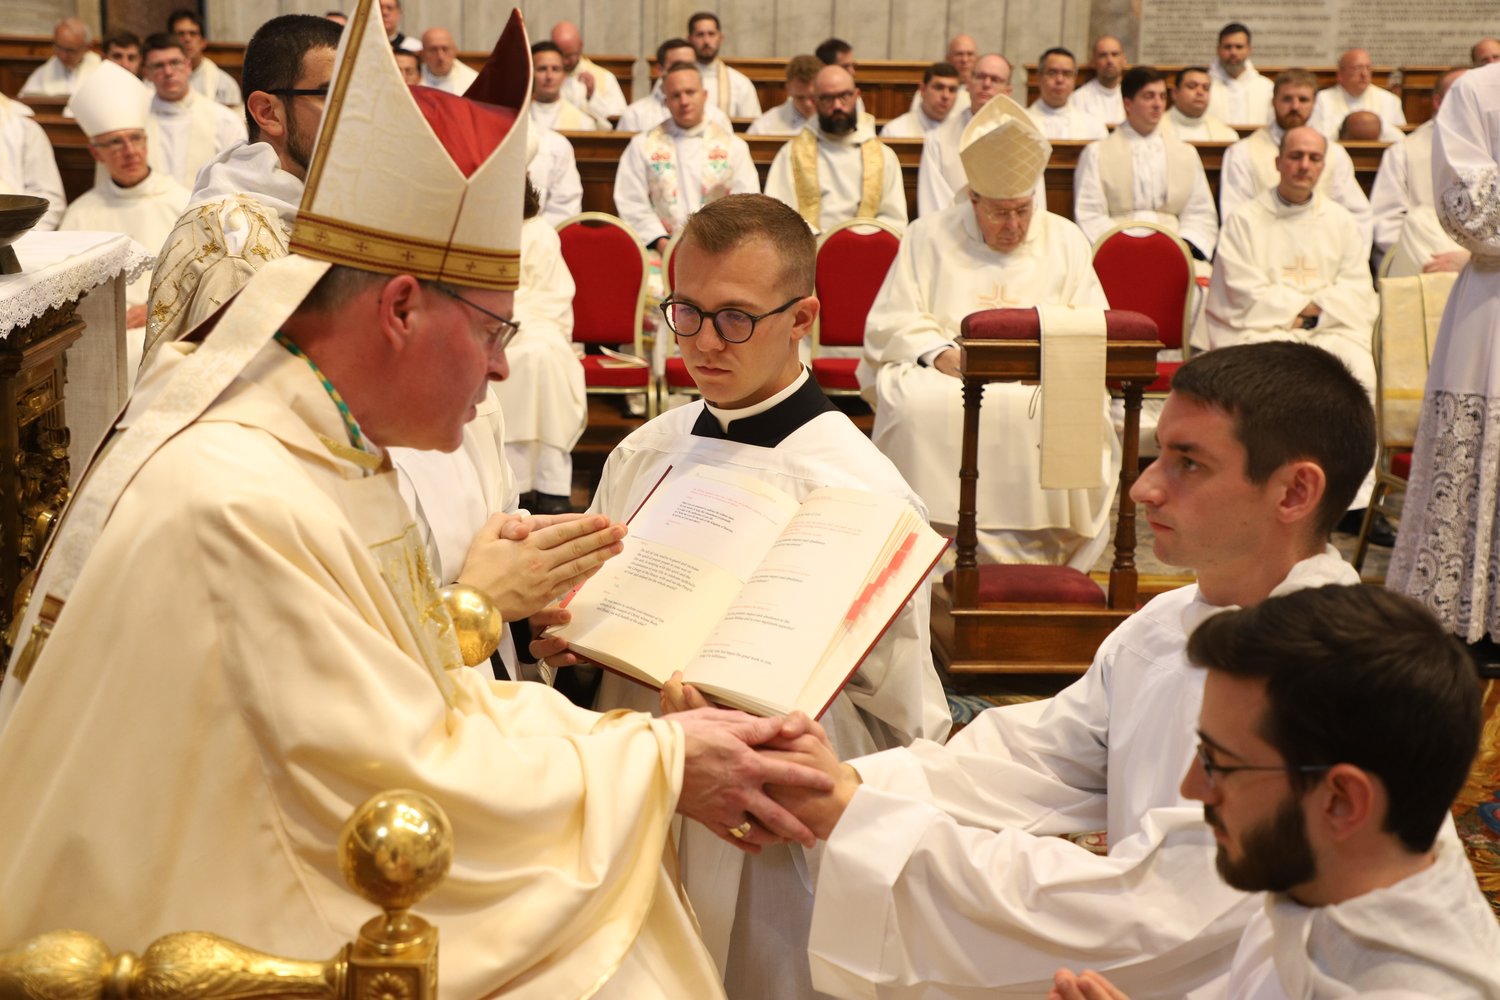 Bishop Austin Vetter, Bishop of Helena, Montana, ordained Patrick Ryan, a seminarian of the Diocese of Providence, and 22 others to the transitional diaconate on Sept. 29.